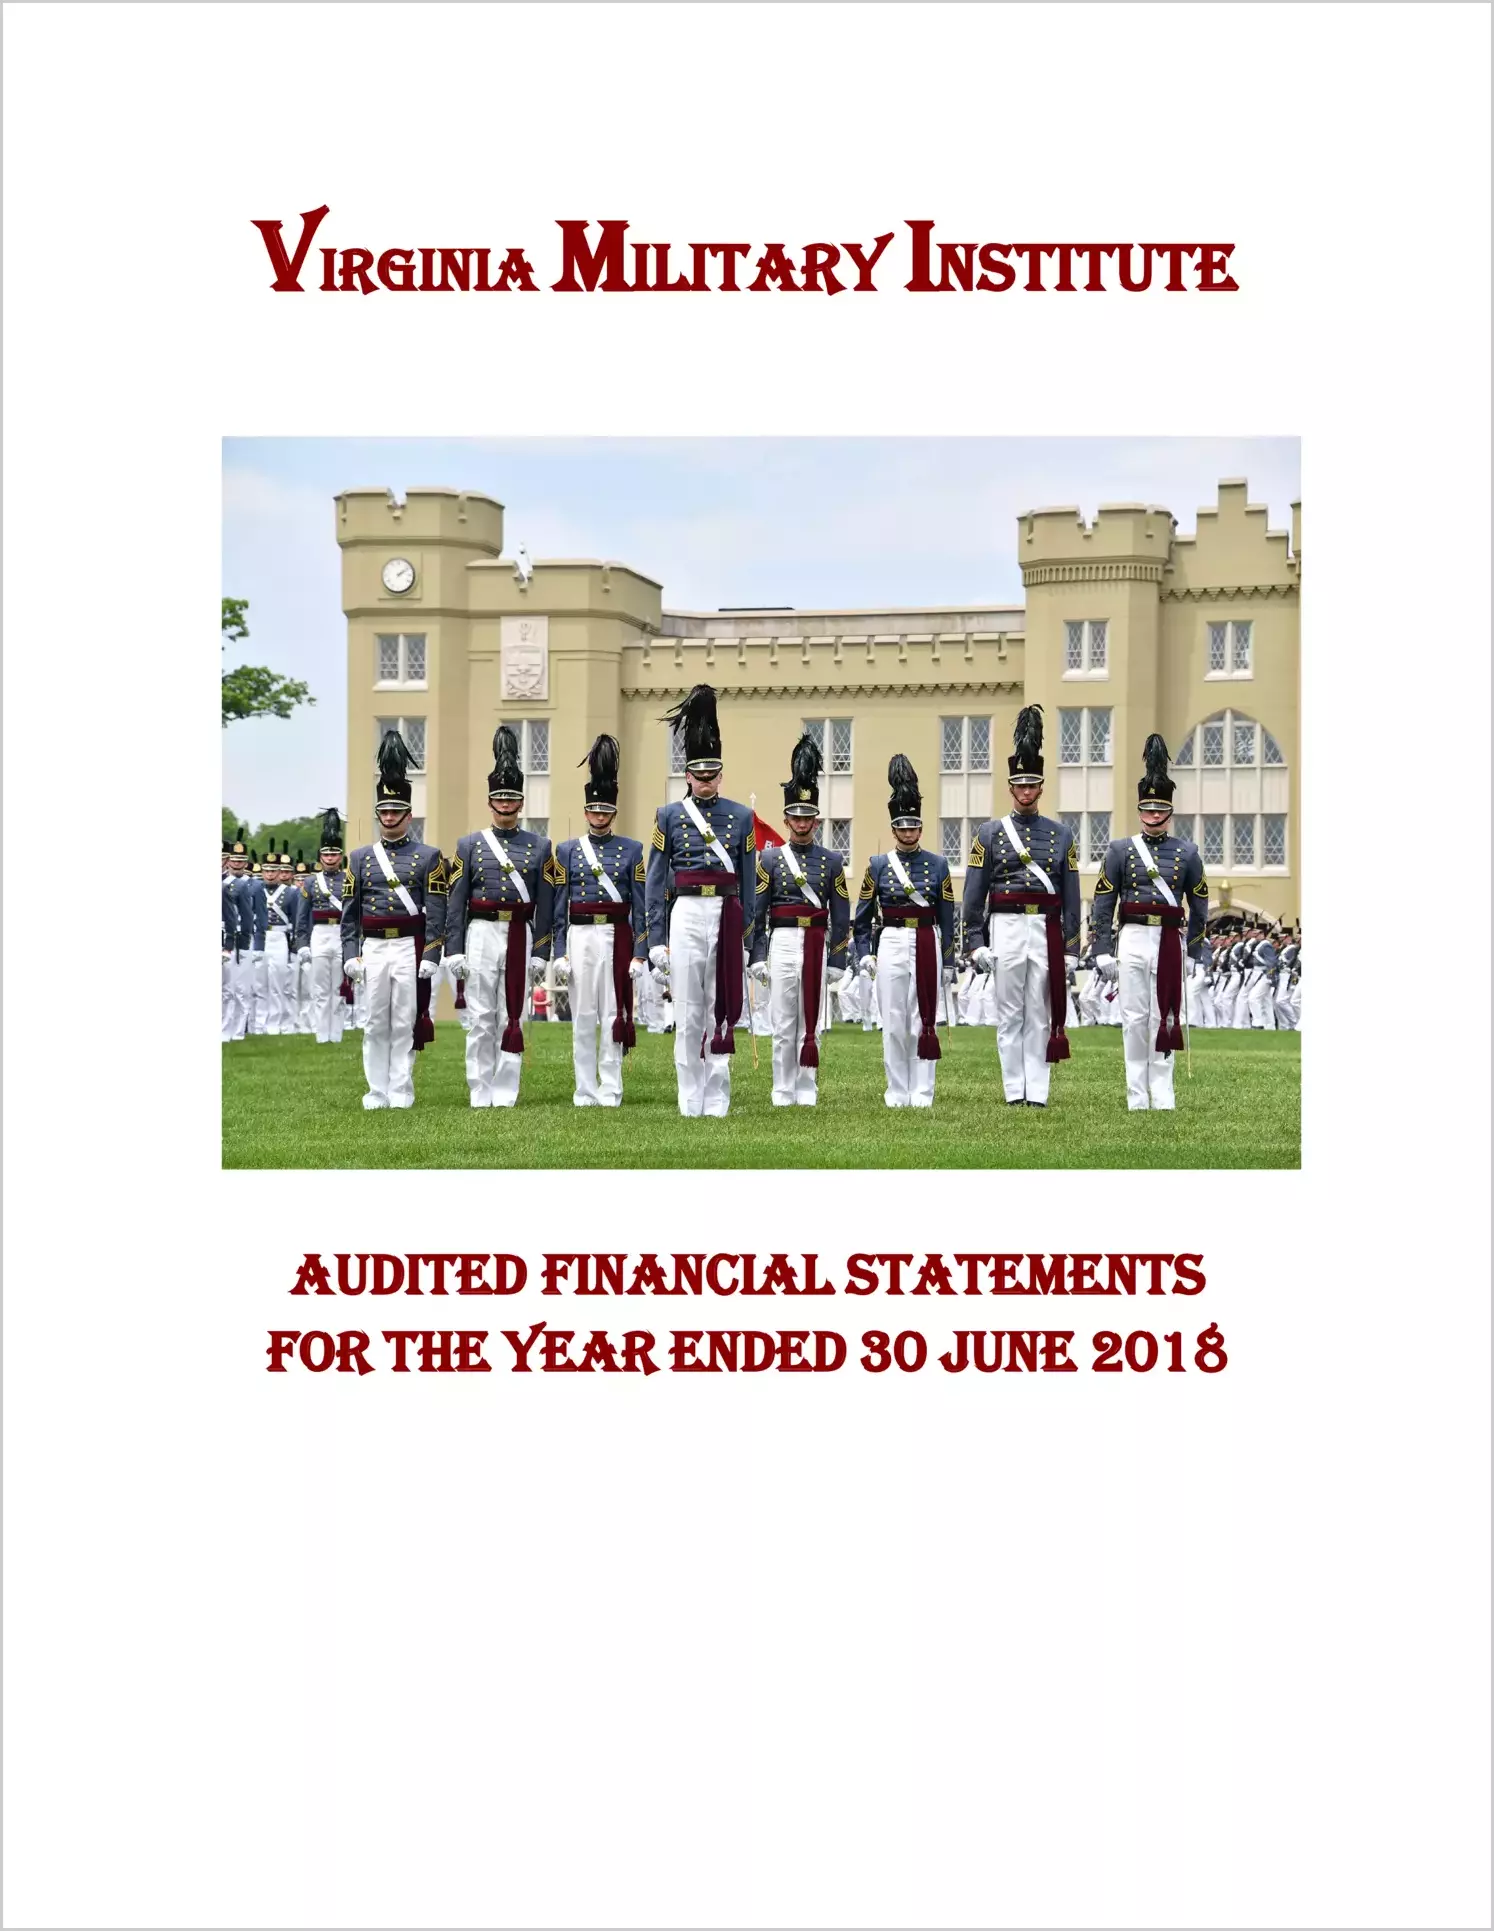 Virginia Military Institute Financial Statements for the year ended June 30, 2018